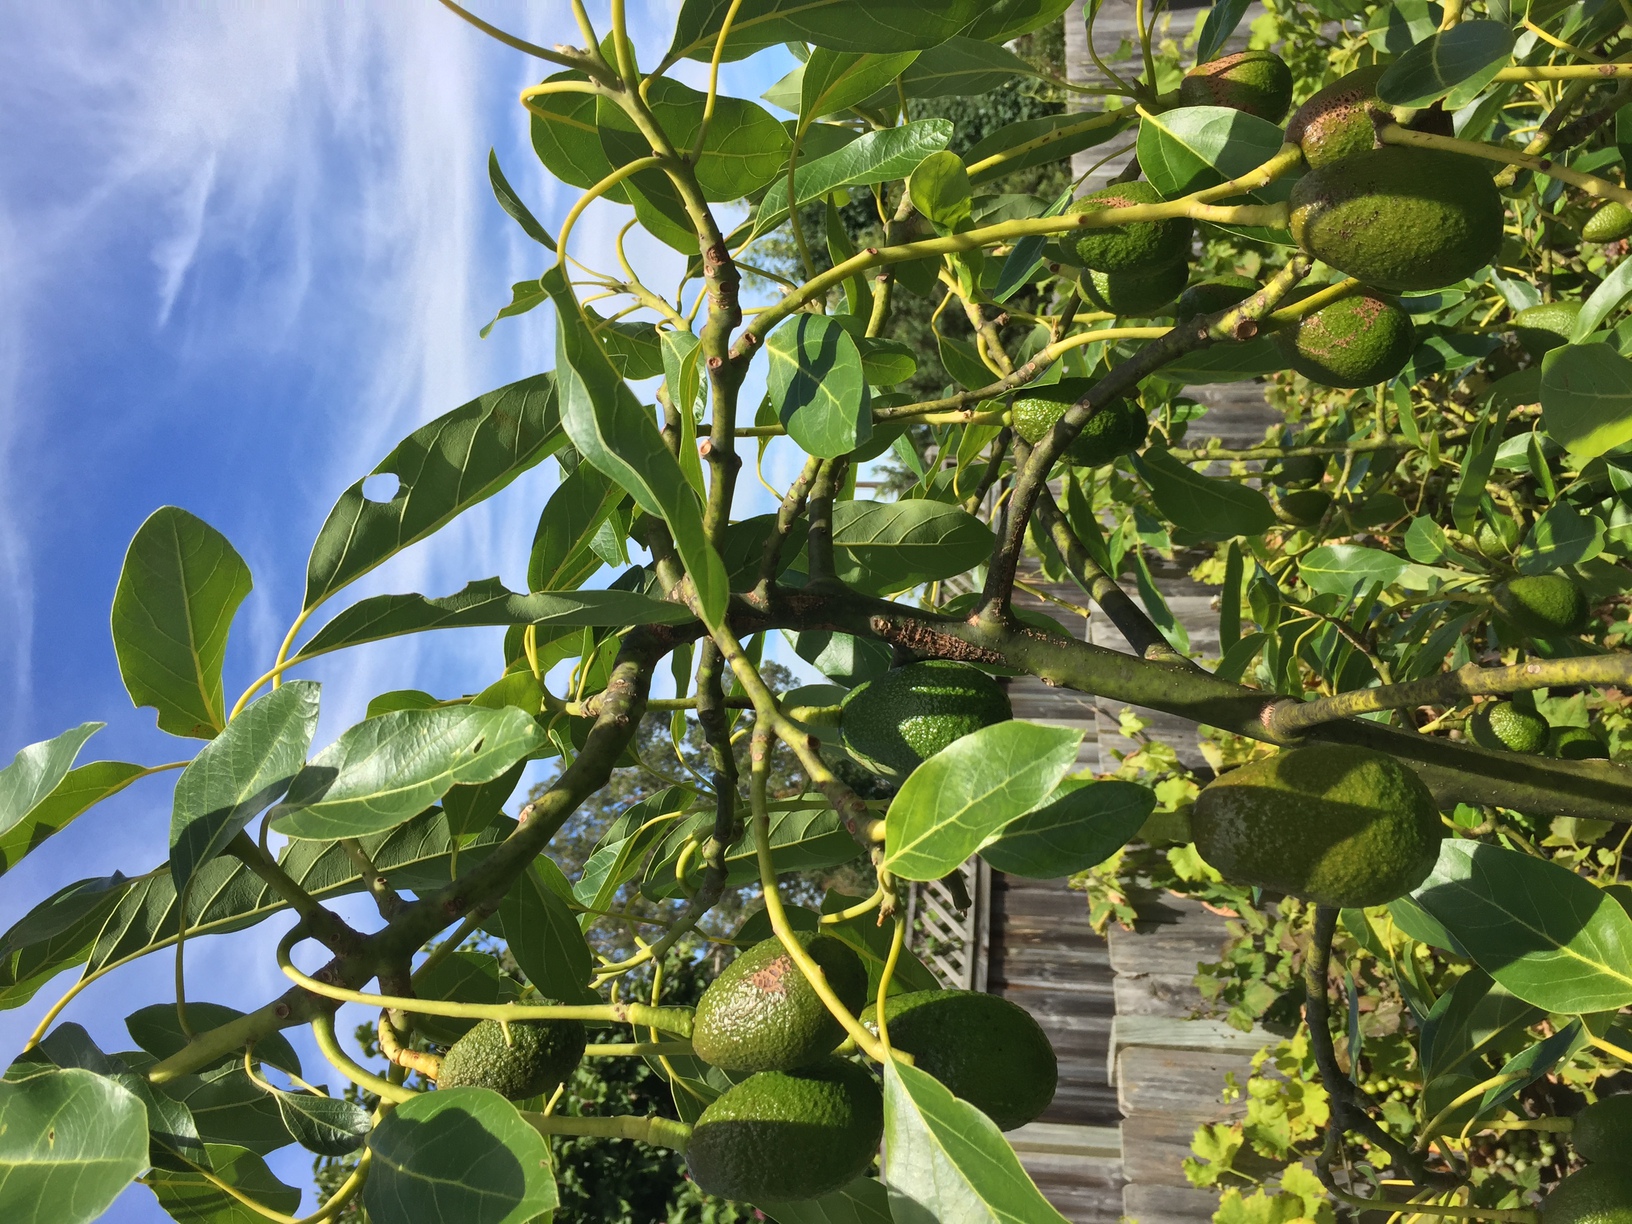 Some of the Hass avocados hanging from the upper branches of the tree